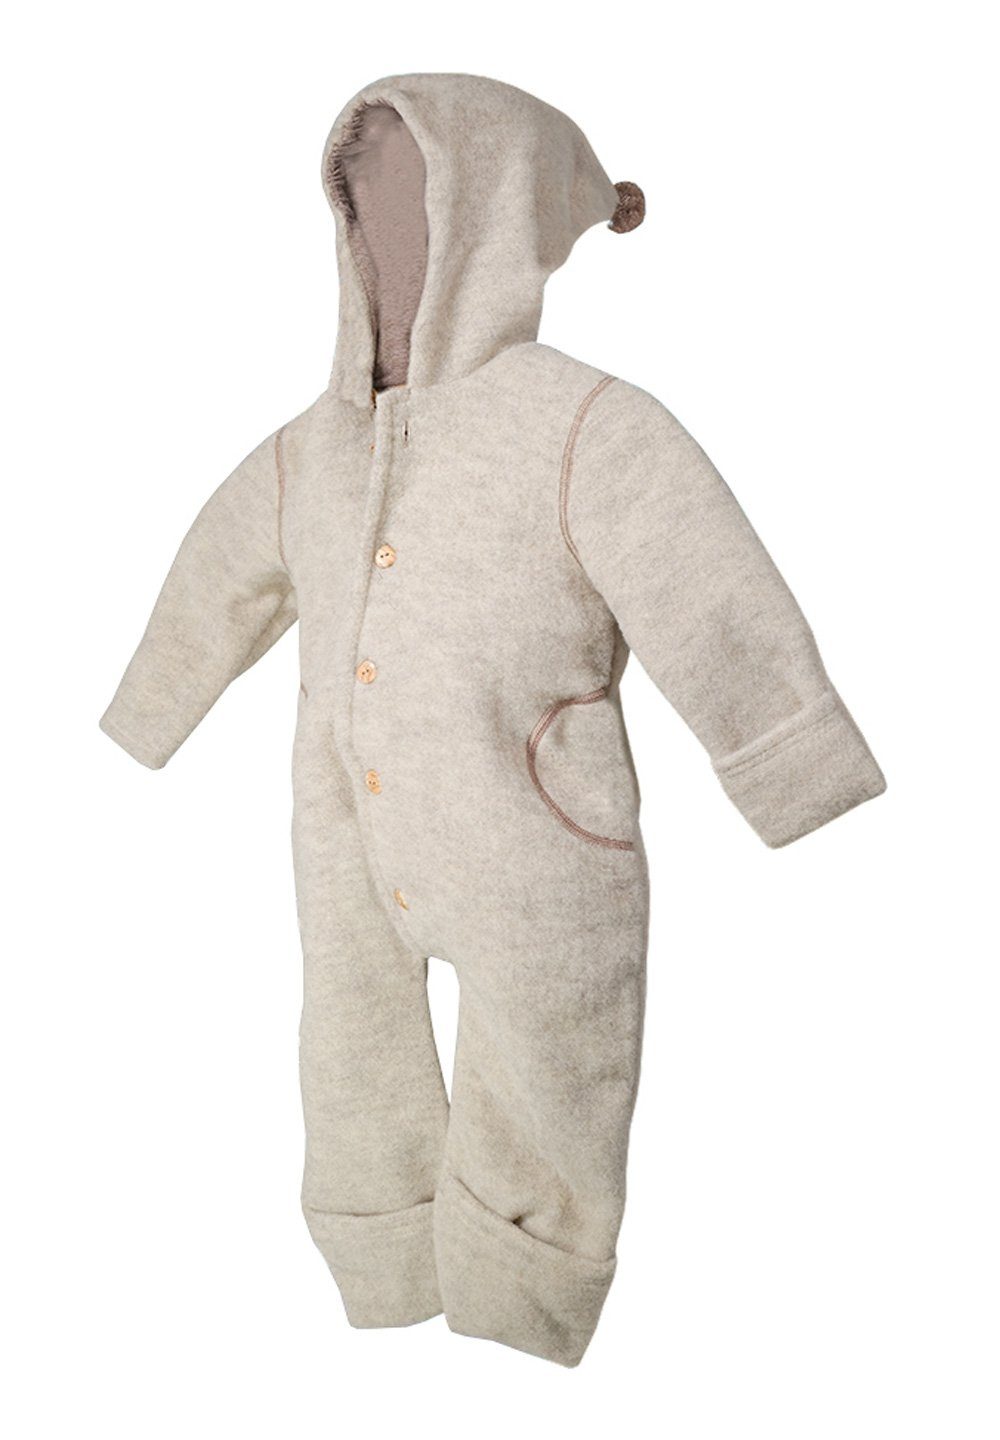 MAXIMO Overall GOTS BABY-Overall, Wollfleece kbT, Jersey kbA Wol Made in  Germany